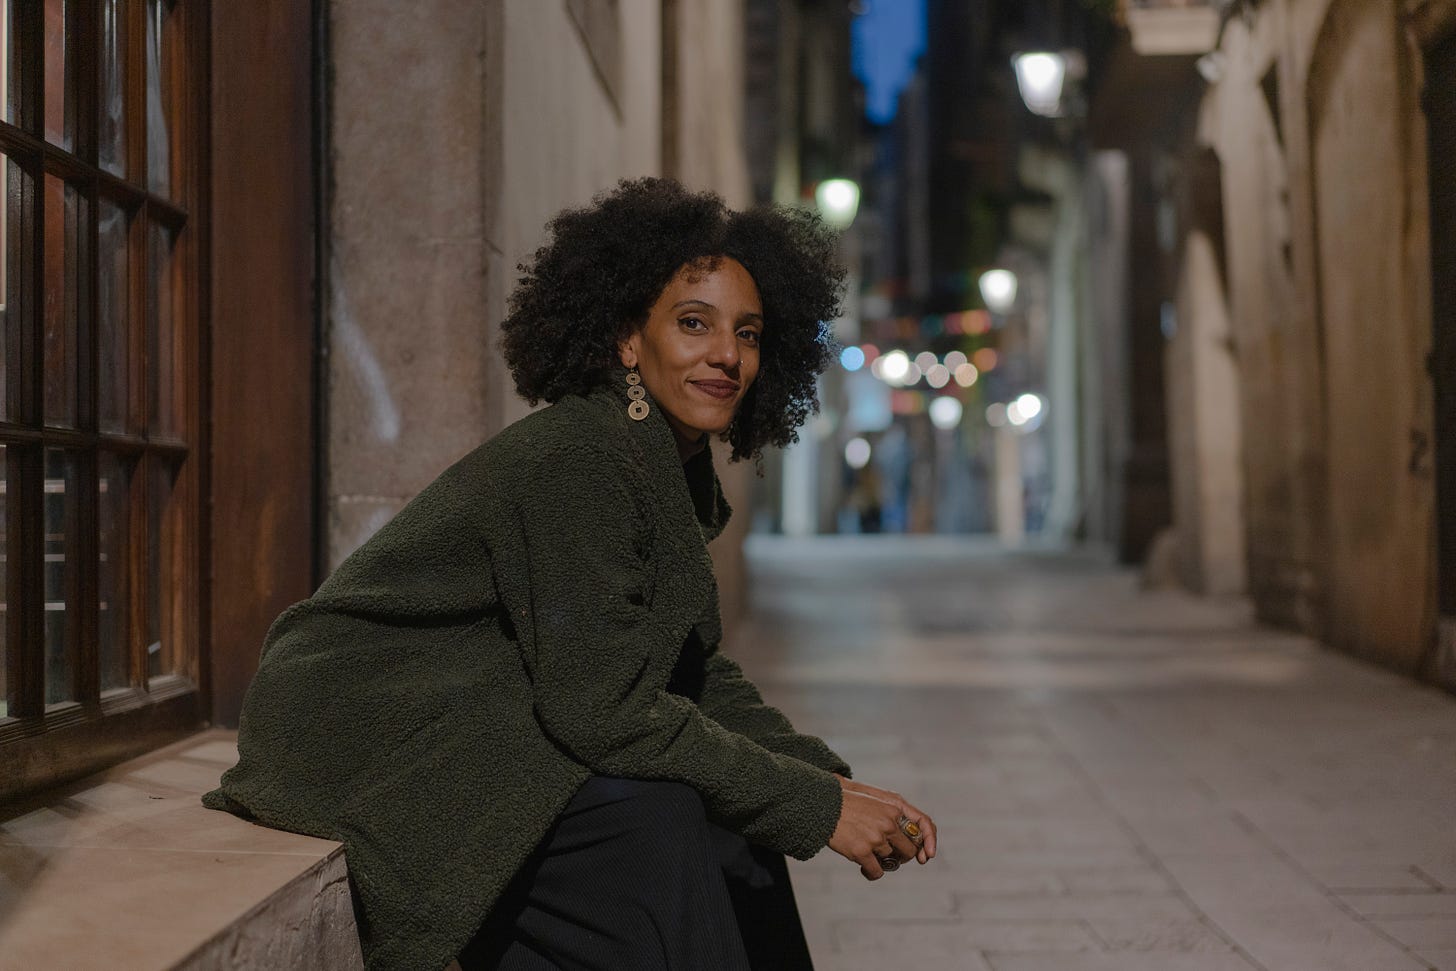 a black woman with dark curly hair sits on the ledge of a wooden window in an alley of Barcelona at dusk. She looks at the camera with a confident smile